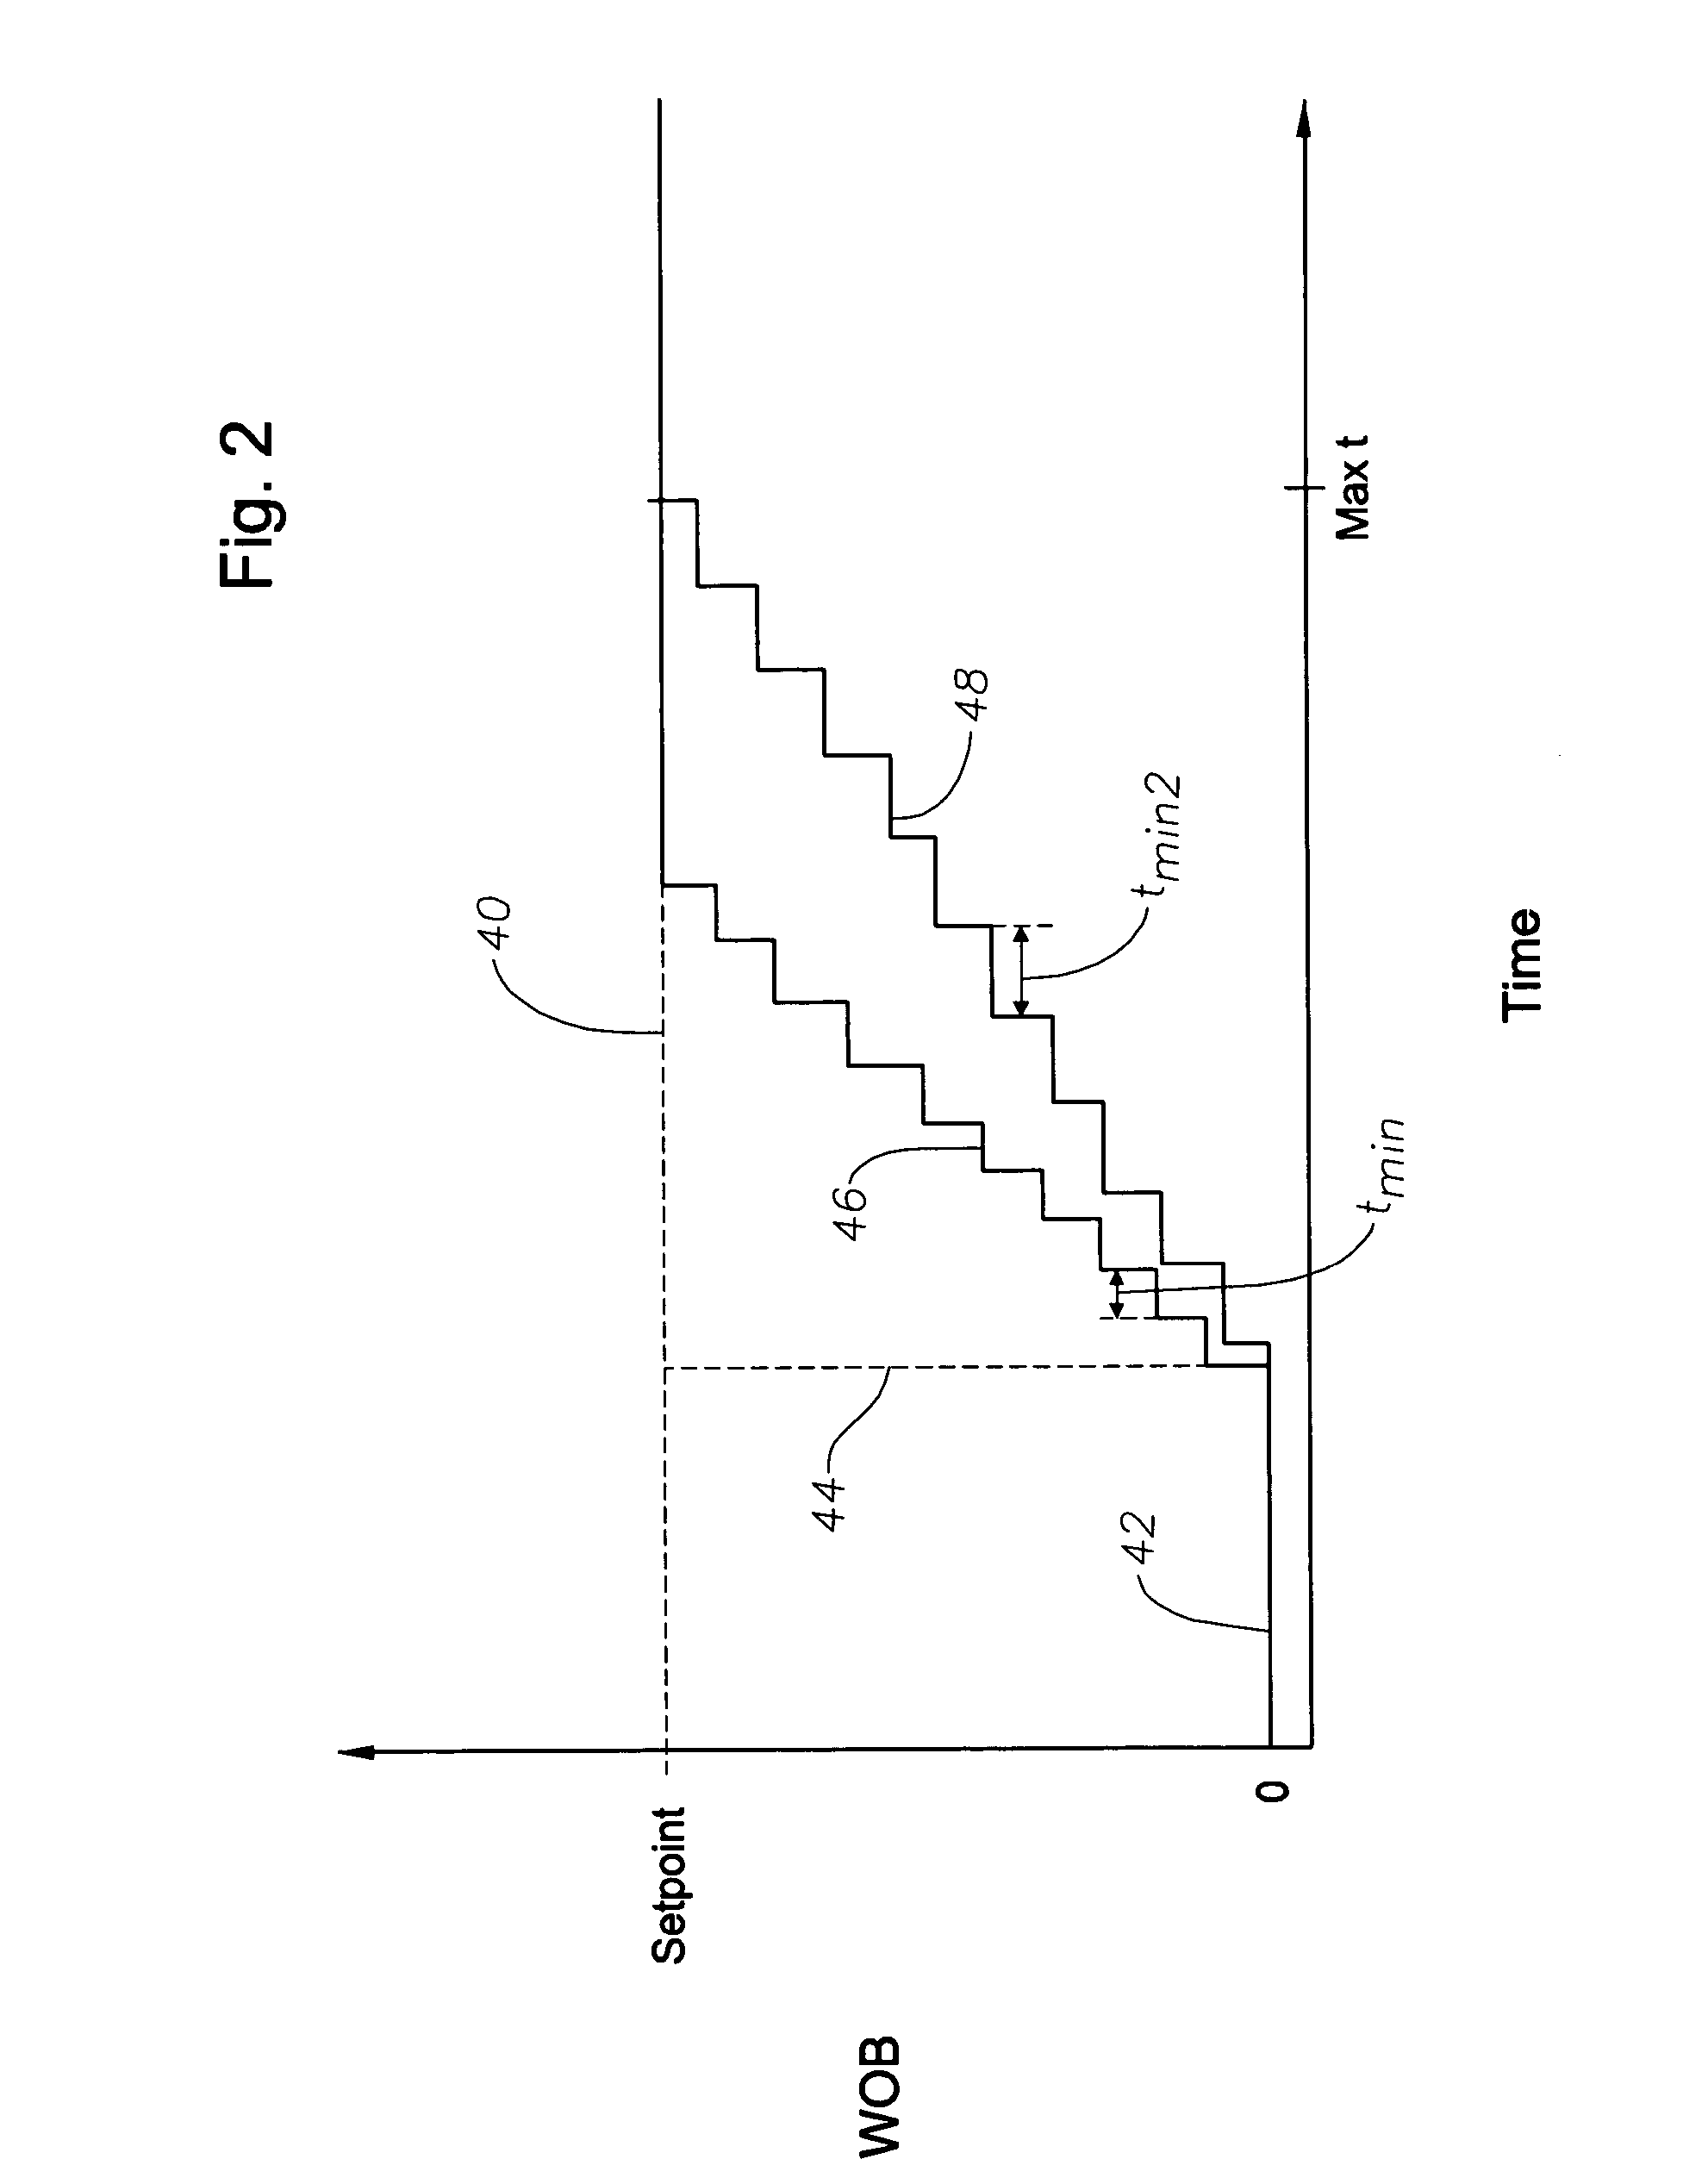 Autodriller bit protection system and method